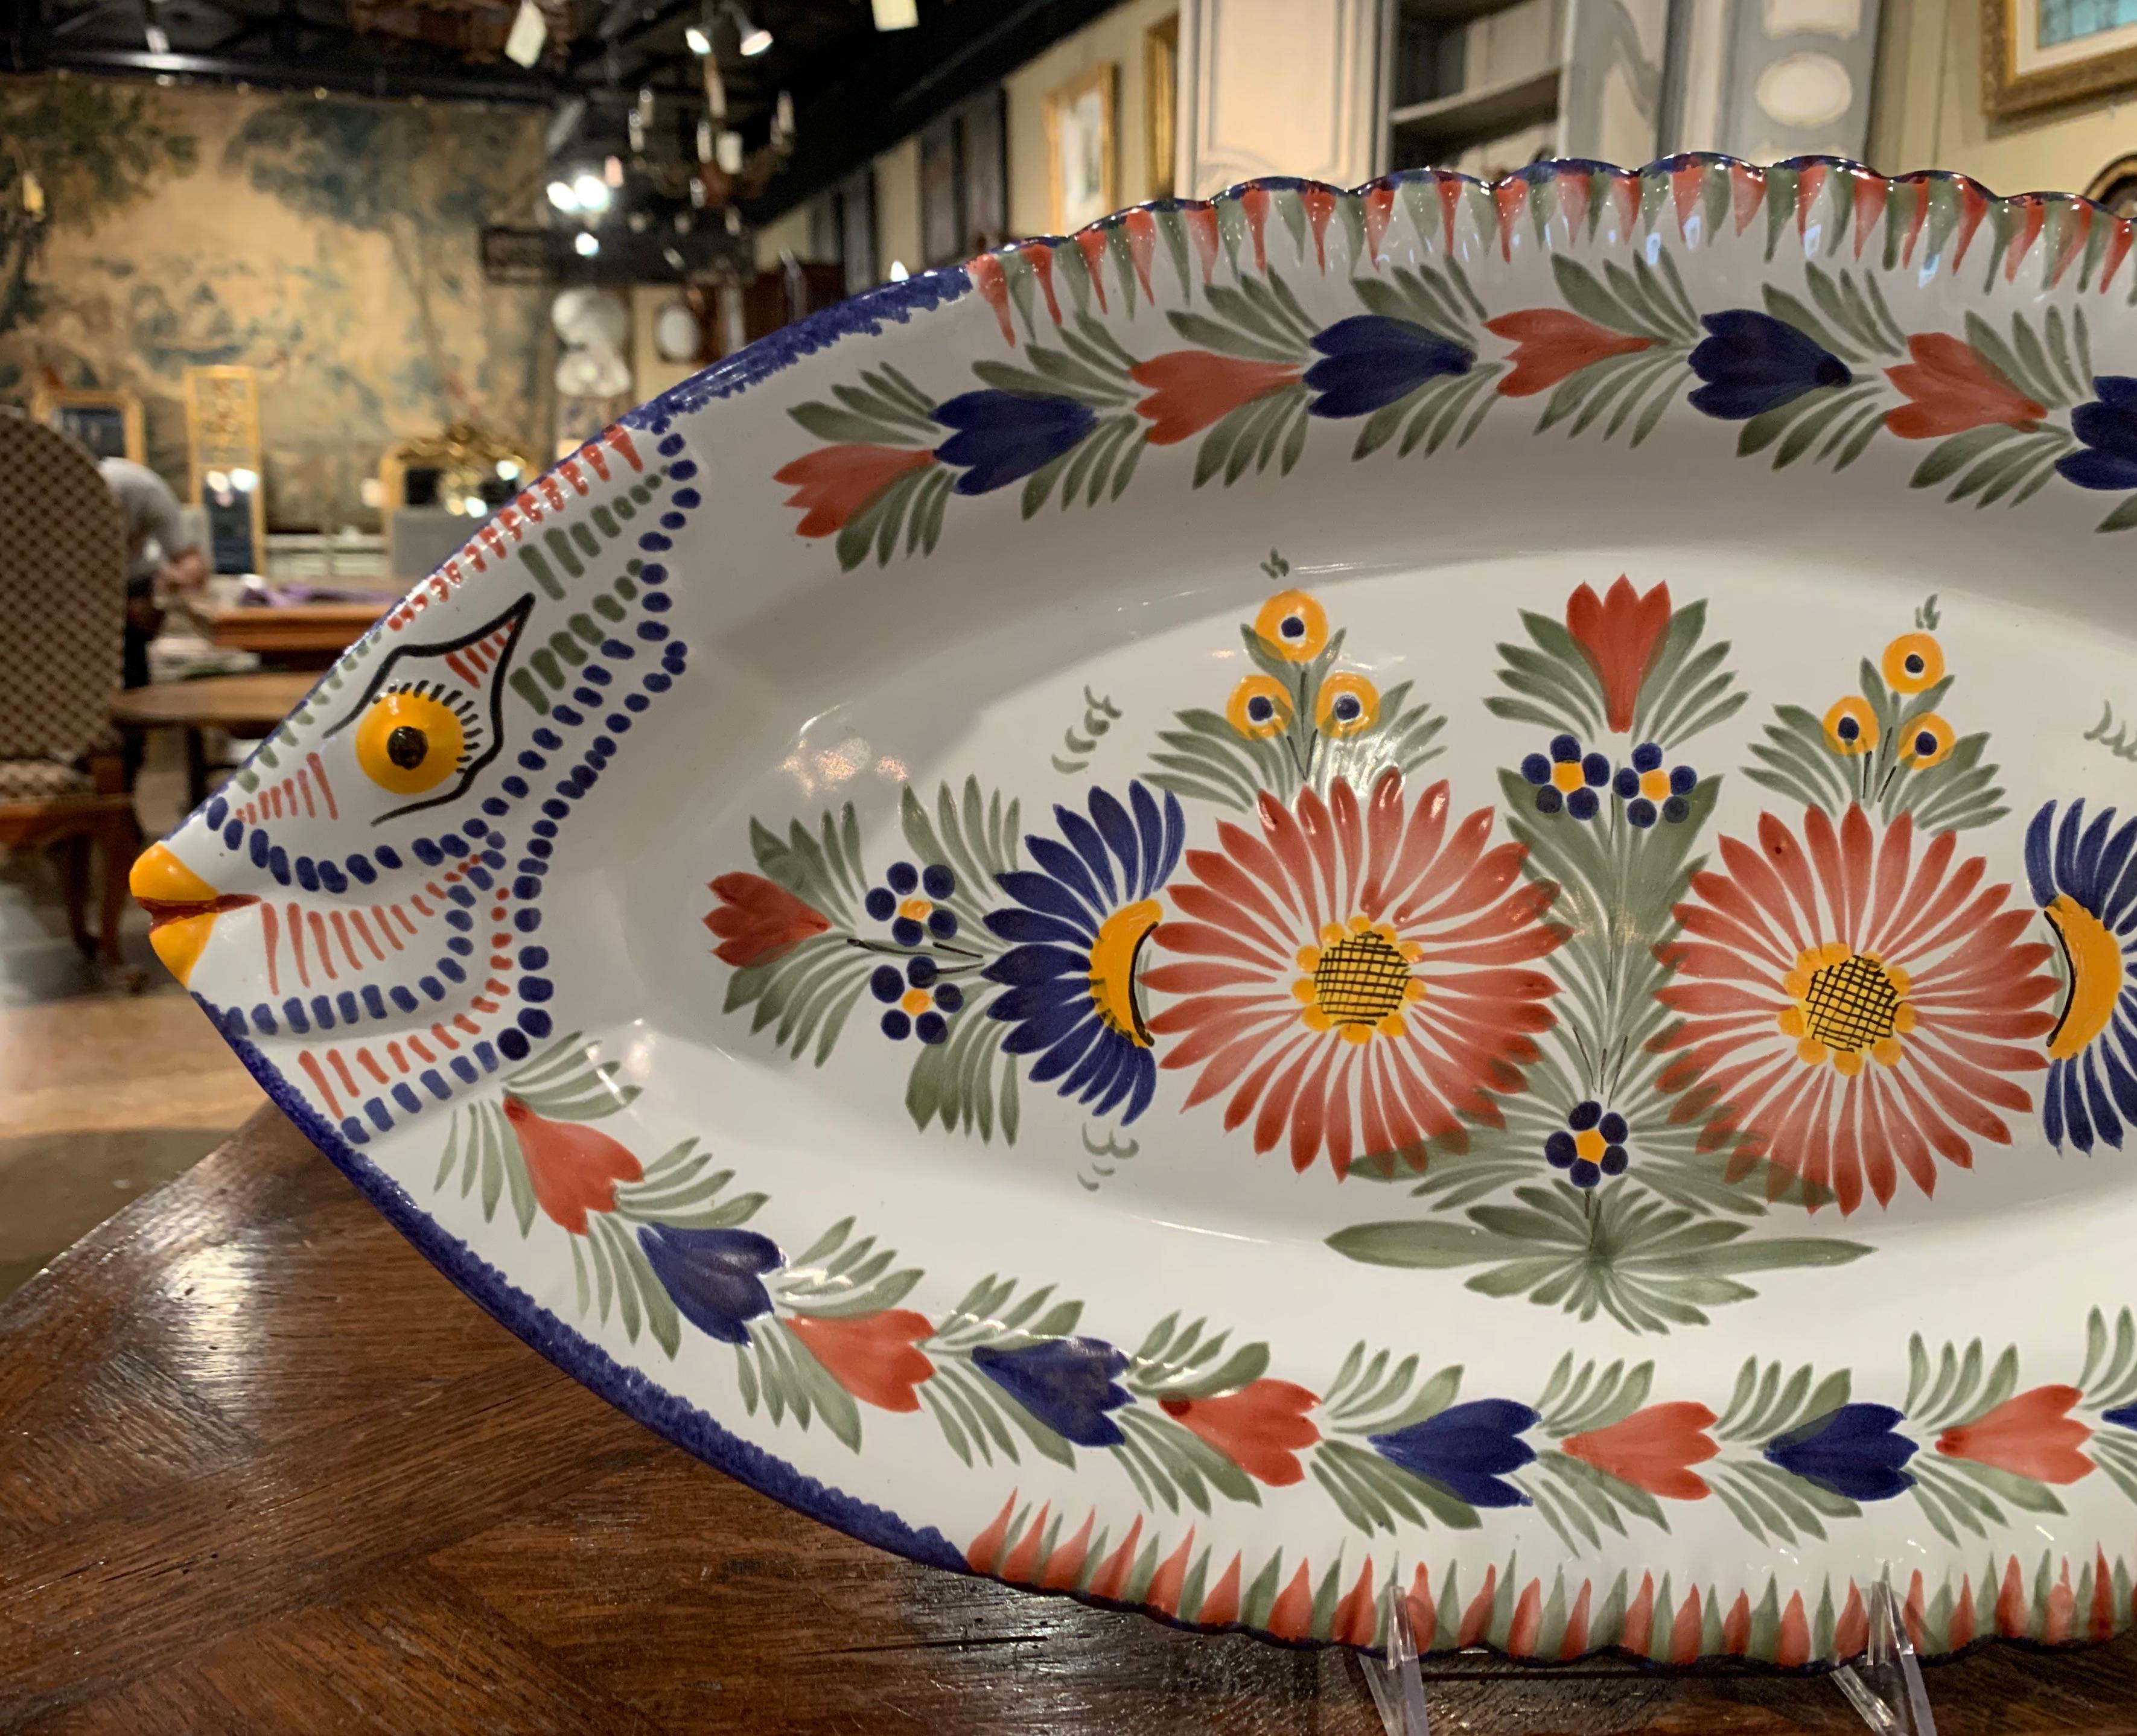 This colorful ceramic platter was created in Brittany, France, circa 1950. Shaped as a fish, the large tray is decorated with hand painted floral motifs in the blue, red and yellow palette over a white background. The serving piece is in excellent